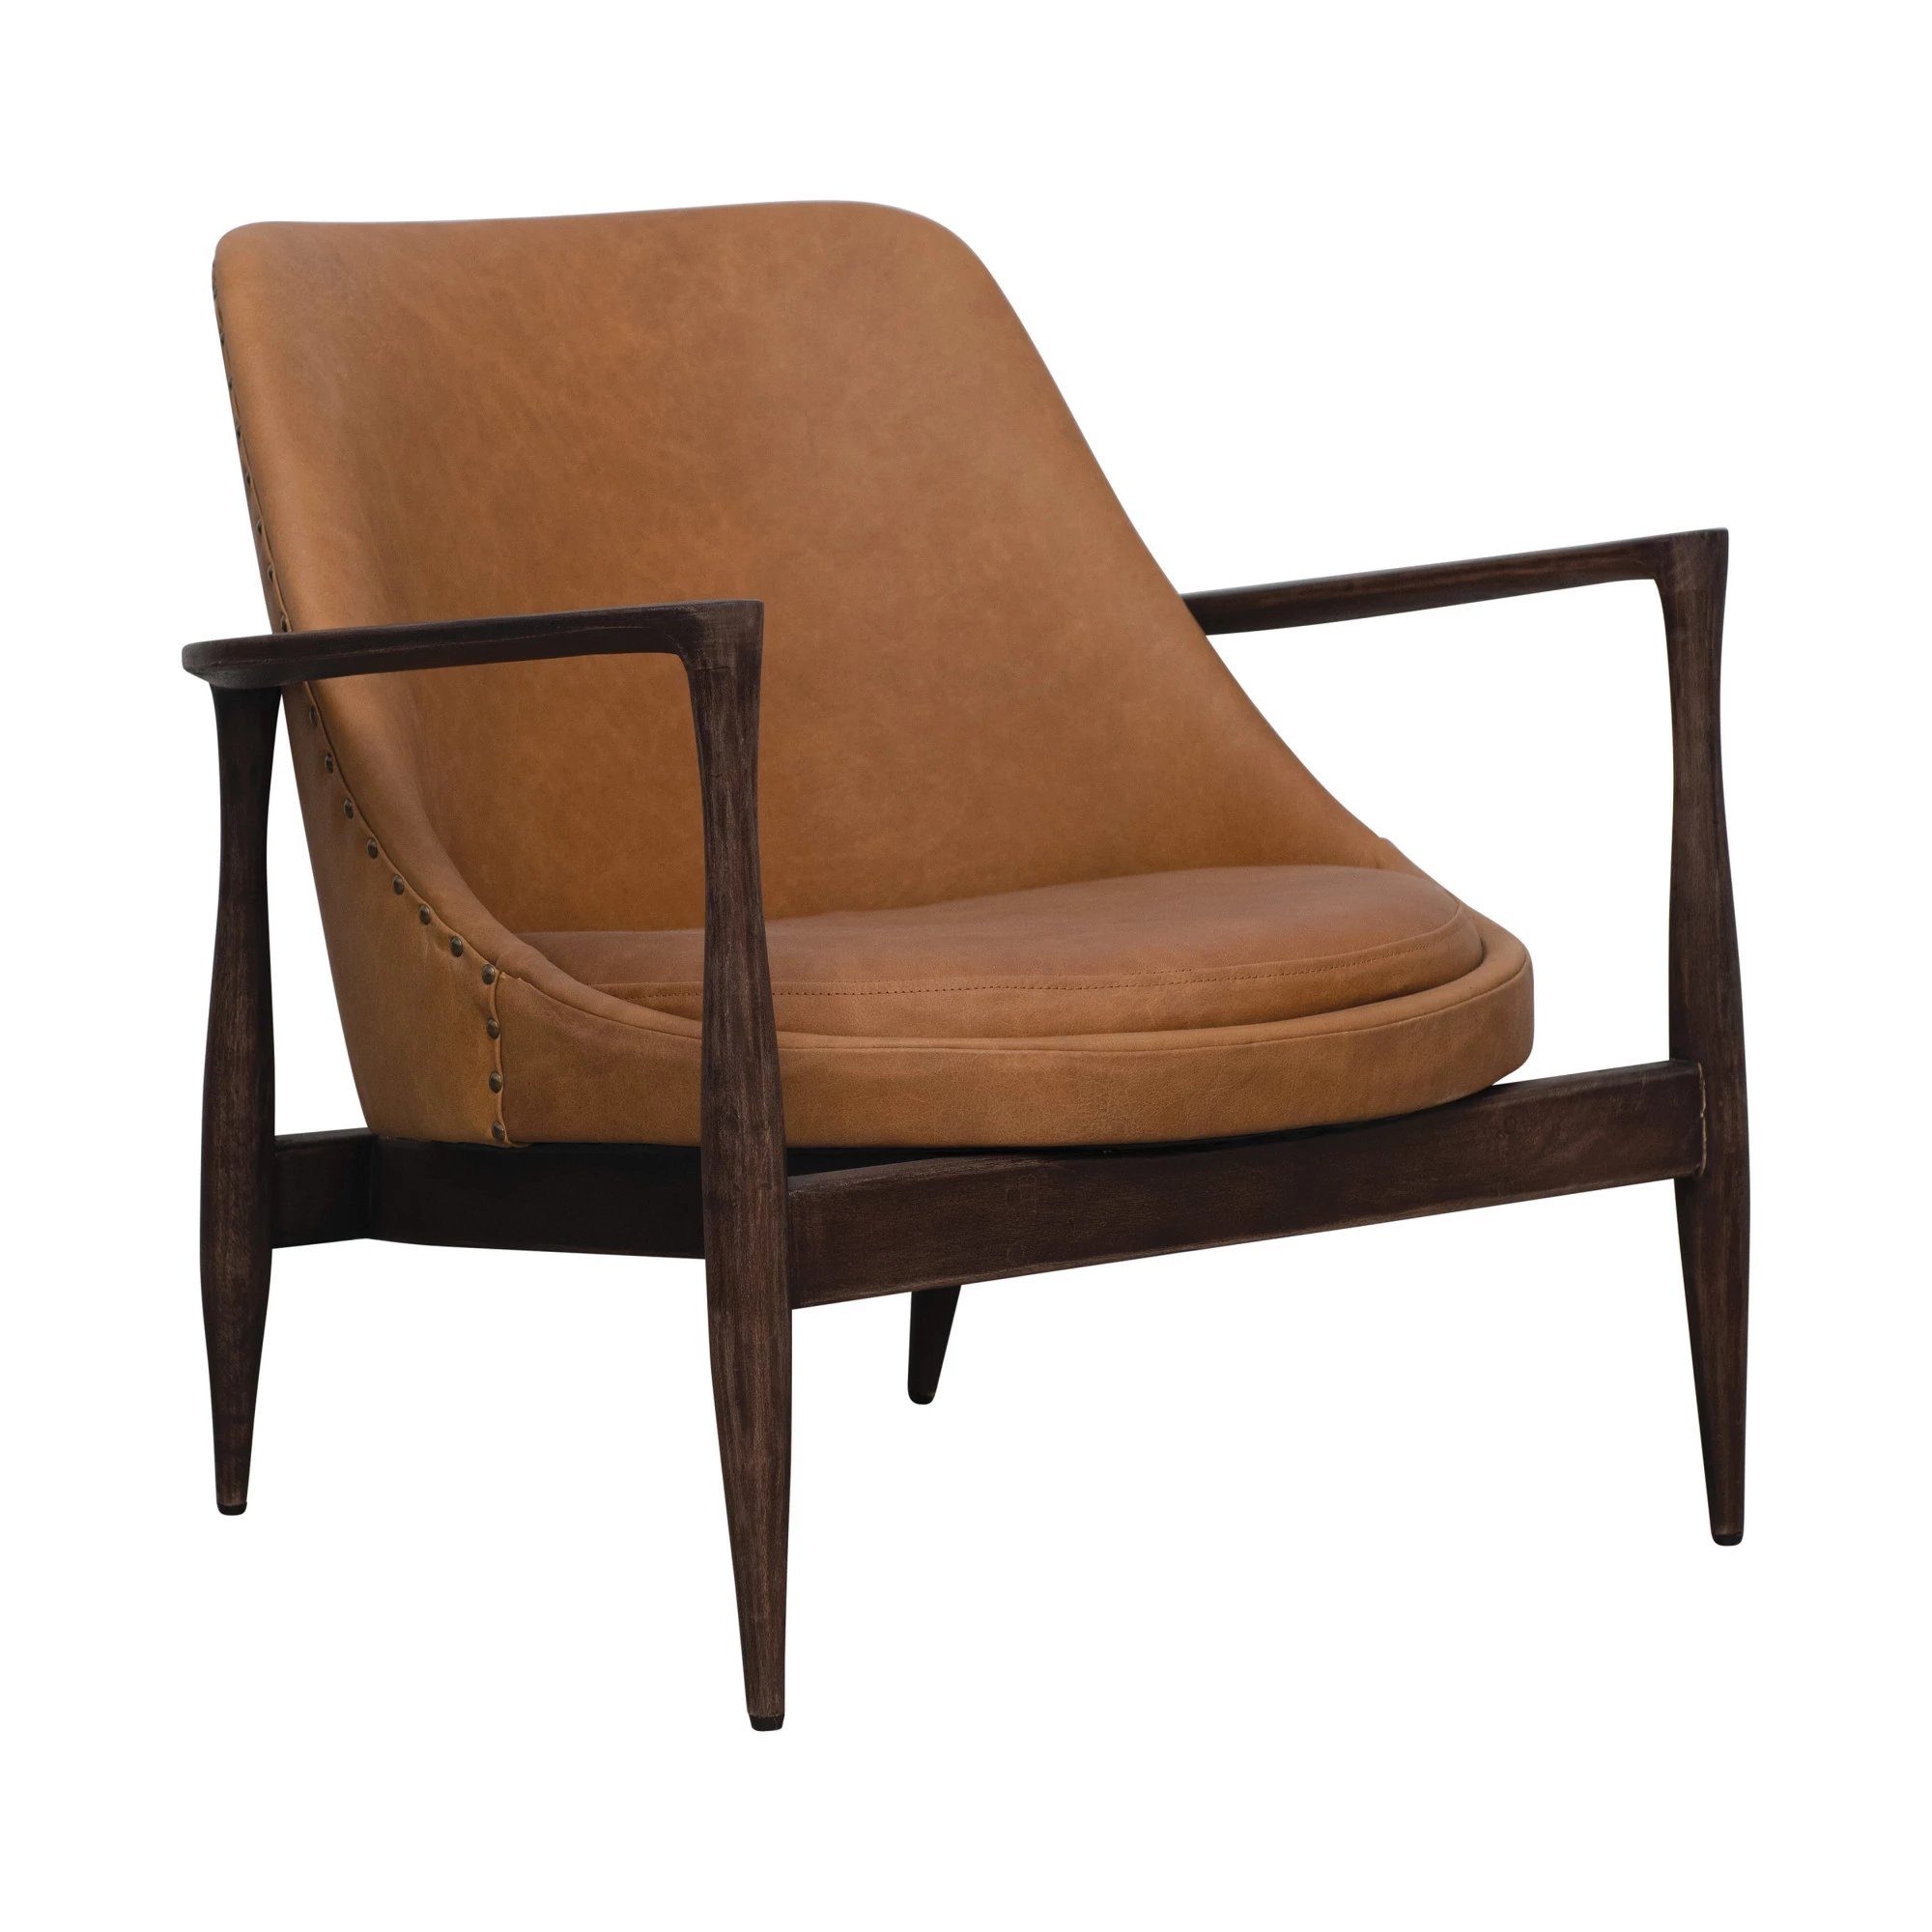 Leather Chair with Mango Wood Frame - Image 1